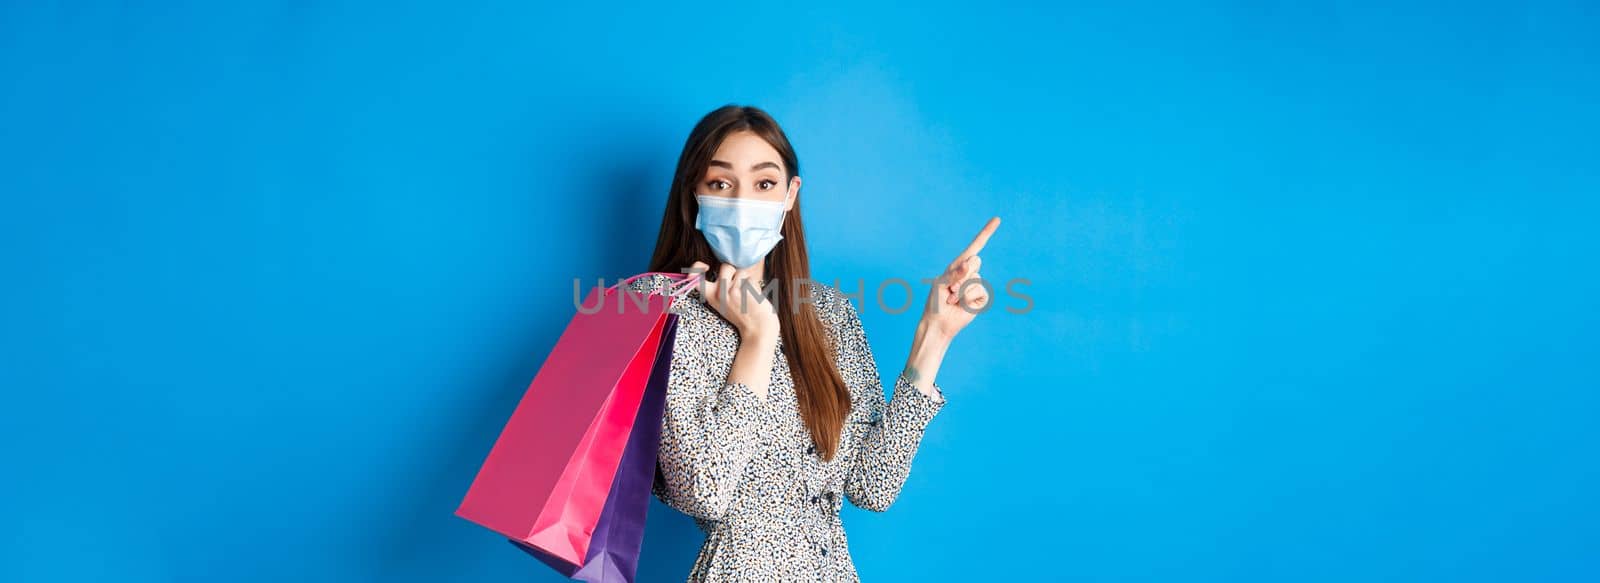 Covid-19, pandemic and lifestyle concept. Excited woman wears medical mask on shopping, pointing left corner logo, holding bags over shoulder, blue background.